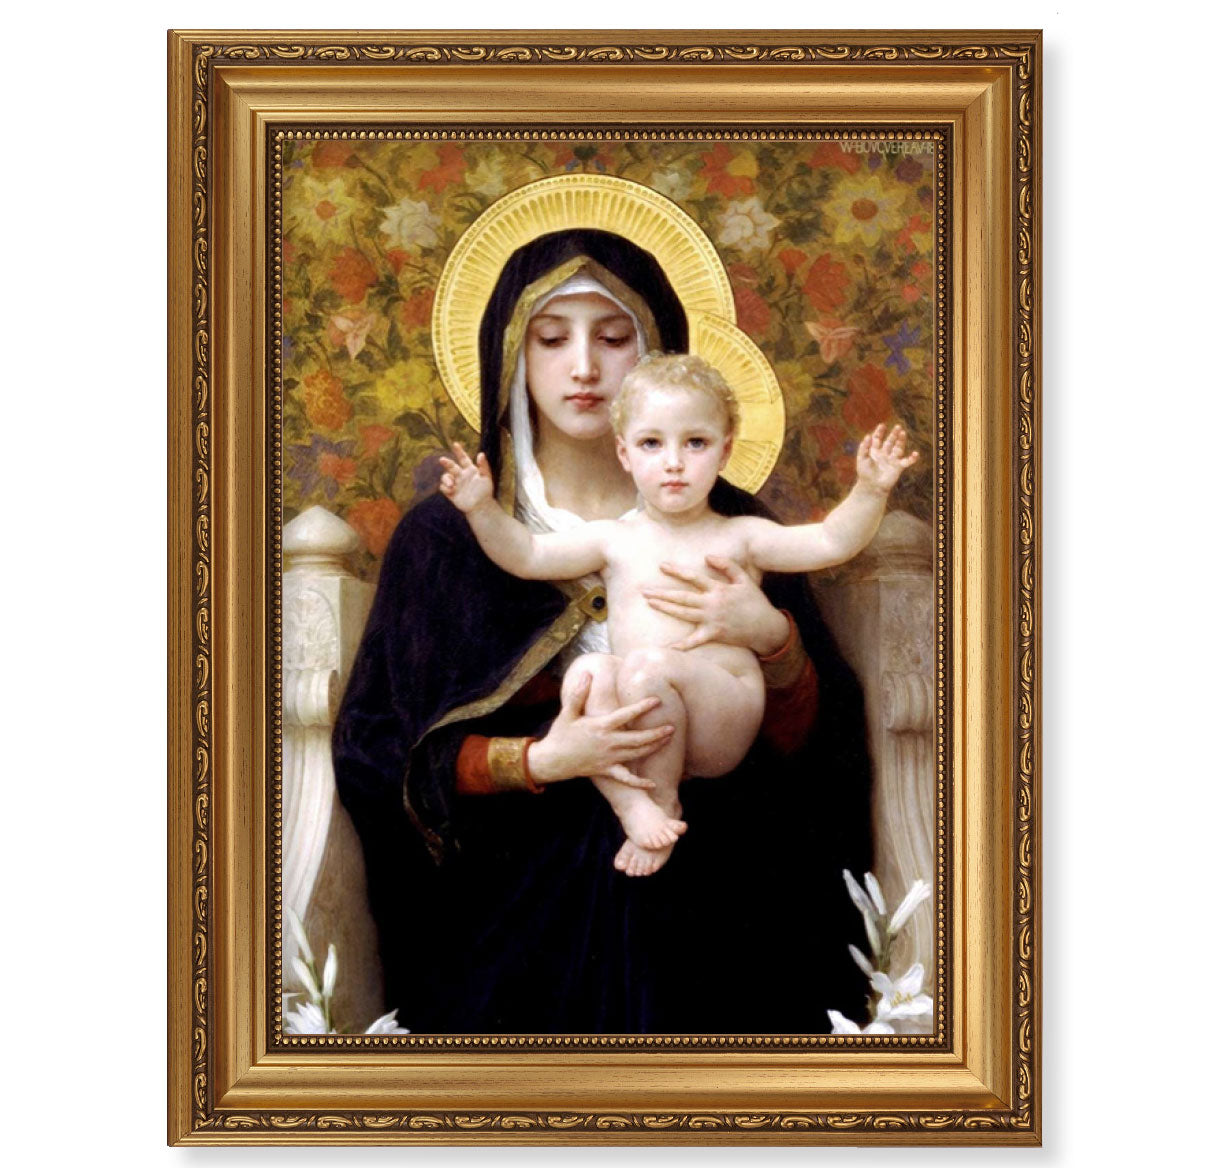 Madonna of the Lilies Antique Picture Framed Wall Art Decor Extra Large, Antique Gold-Leaf Frame with Acanthus-Leaf Trim and Beaded Lip